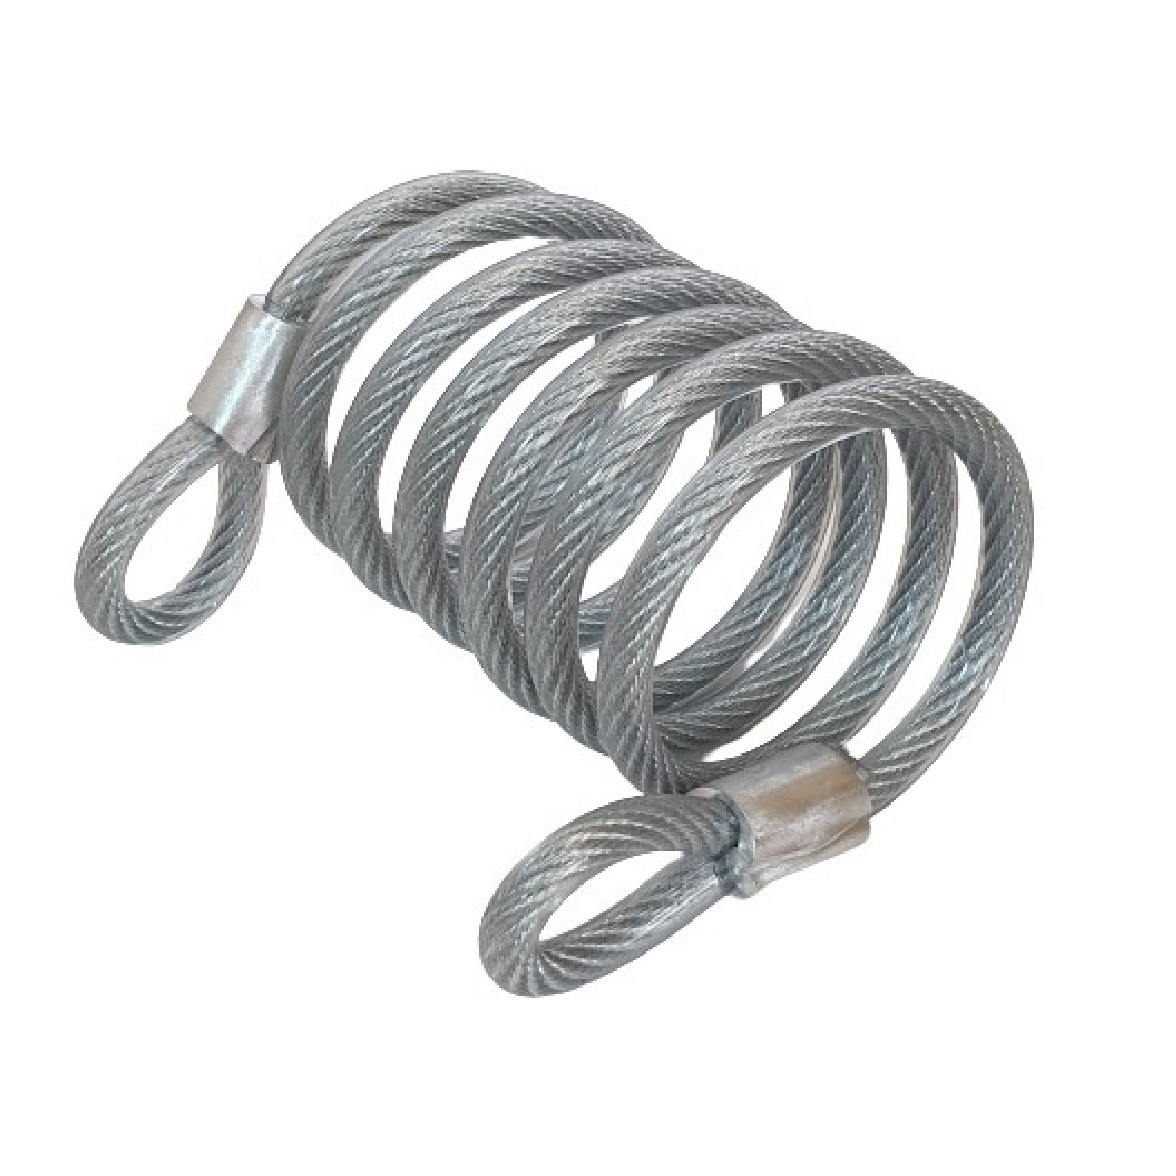 Steel Wire Rope Security Cable Rope With Sealed Loop Ends